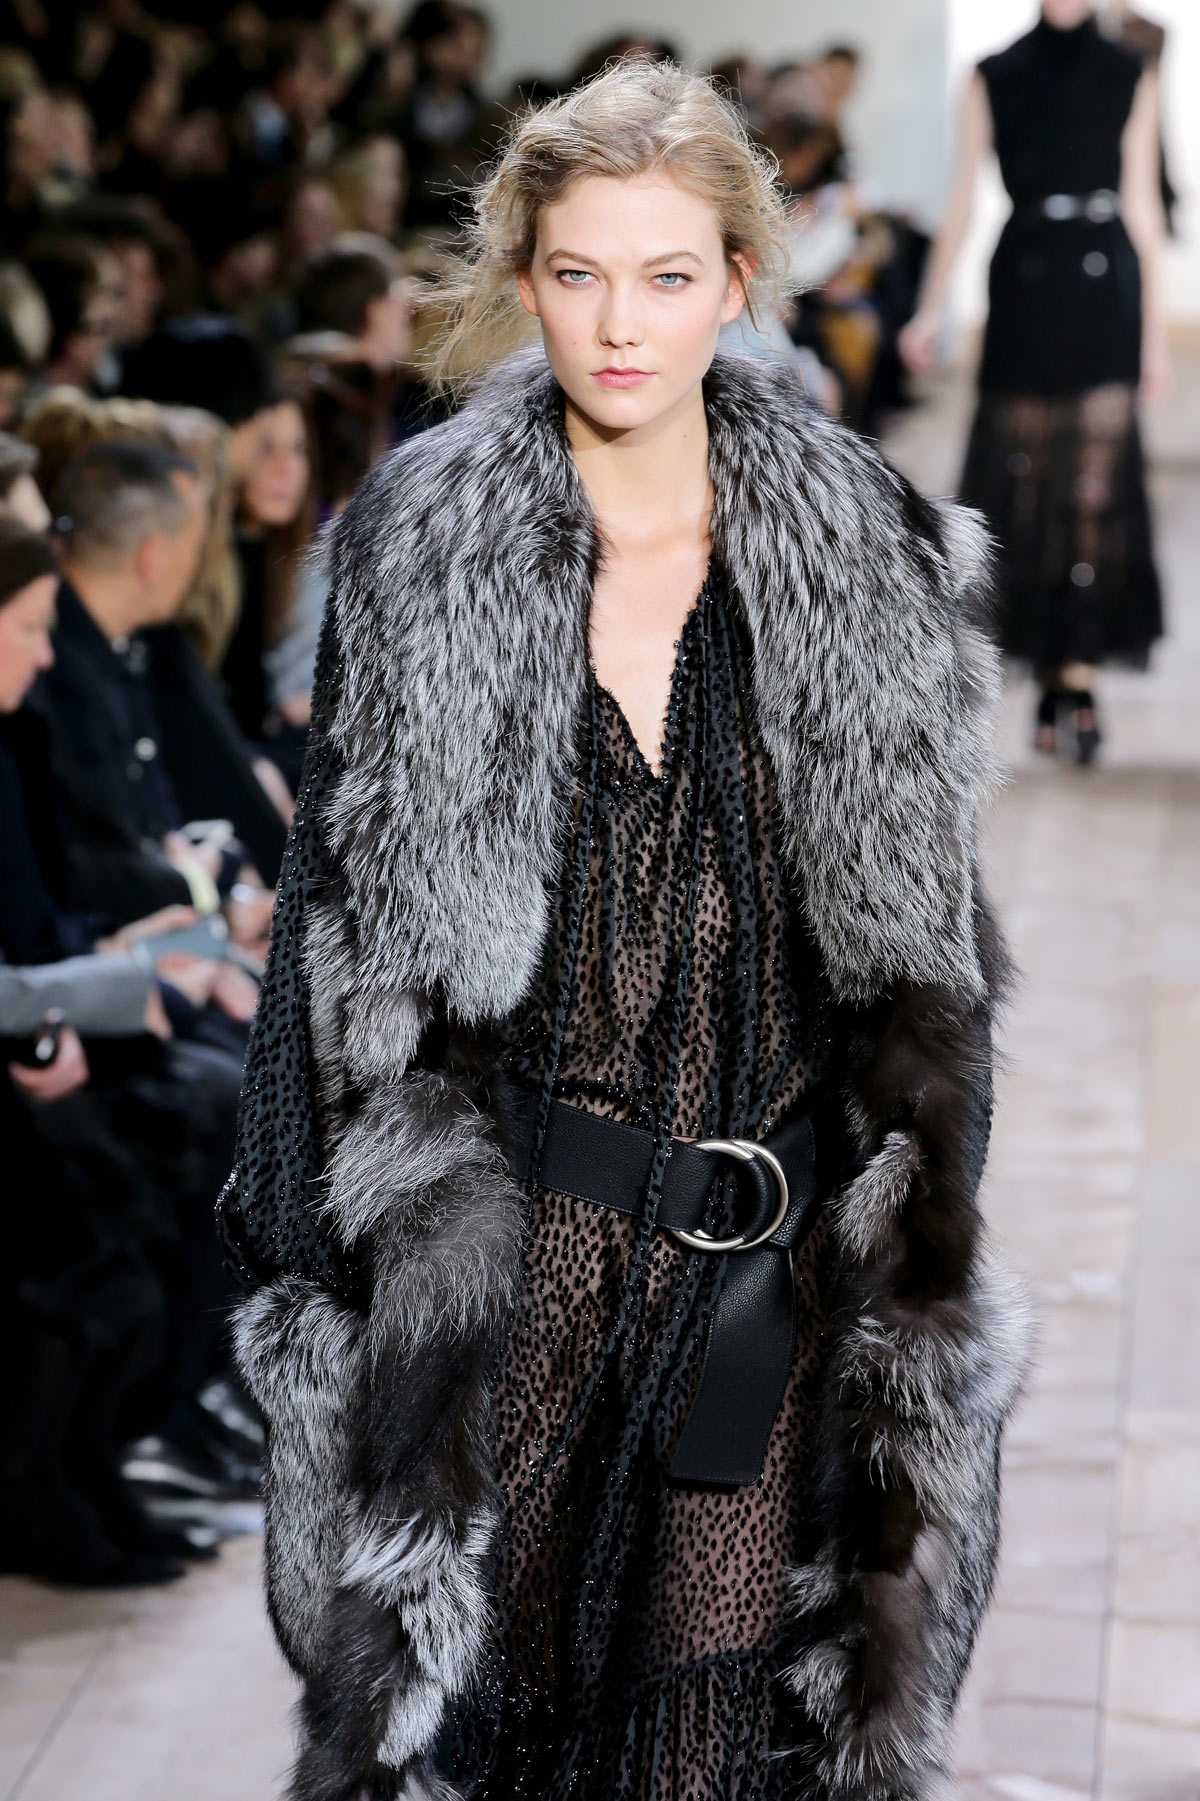 Michael Kors fashion show - Mercedes-Benz Fashion Week Fall 2014 at Spring Studios on February 12, 2014 in New York City.